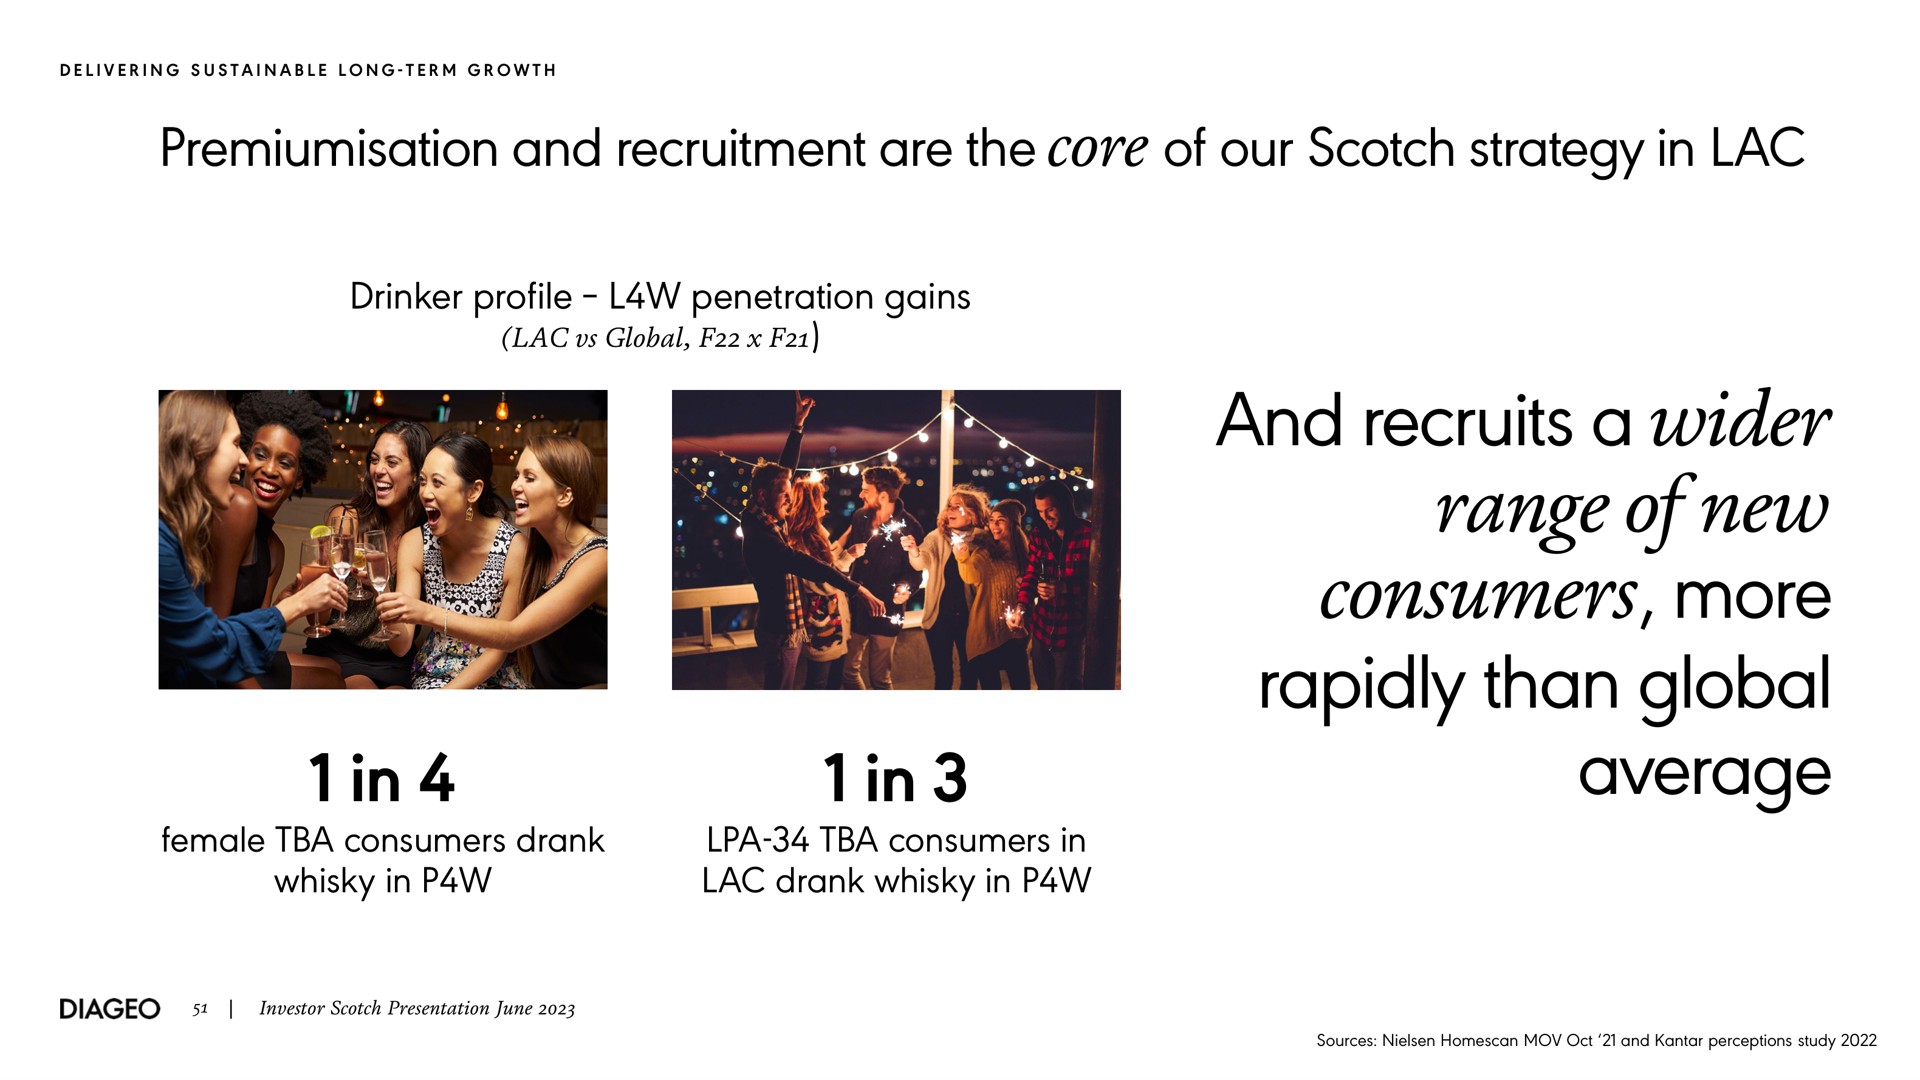 and recruitment are the core of our scotch strategy in lac drinker profile penetration gains and recruits a range of new consumers more rapidly than global average in female consumers drank whisky in in consumers in lac drank whisky in delivering sustainable long term growth in in investor presentation june sources perceptions study | Diageo